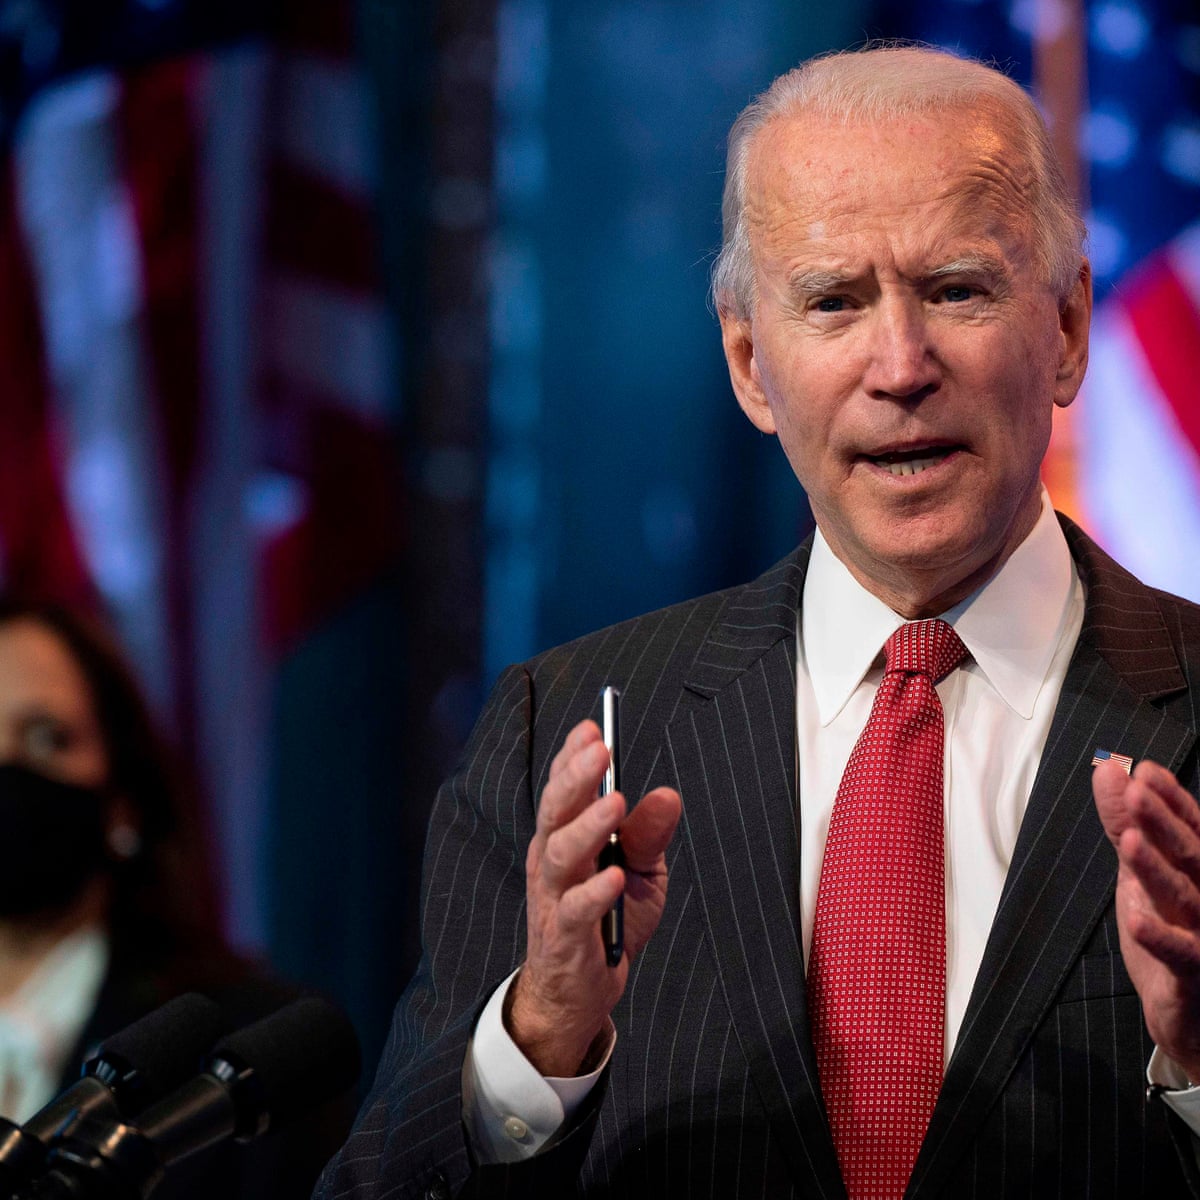 why is joe biden doing so well in polls reddit - Biden|President|Joe|Years|Trump|Delaware|Vice|Time|Obama|Senate|States|Law|Age|Campaign|Election|Administration|Family|House|Senator|Office|School|Wife|People|Hunter|University|Act|State|Year|Life|Party|Committee|Children|Beau|Daughter|War|Jill|Day|Facts|Americans|Presidency|Joe Biden|United States|Vice President|White House|Law School|President Trump|Foreign Relations Committee|Donald Trump|President Biden|Presidential Campaign|Presidential Election|Democratic Party|Syracuse University|United Nations|Net Worth|Barack Obama|Judiciary Committee|Neilia Hunter|U.S. Senate|Hillary Clinton|New York Times|Obama Administration|Empty Store Shelves|Systemic Racism|Castle County Council|Archmere Academy|U.S. Senator|Vice Presidency|Second Term|Biden Administration